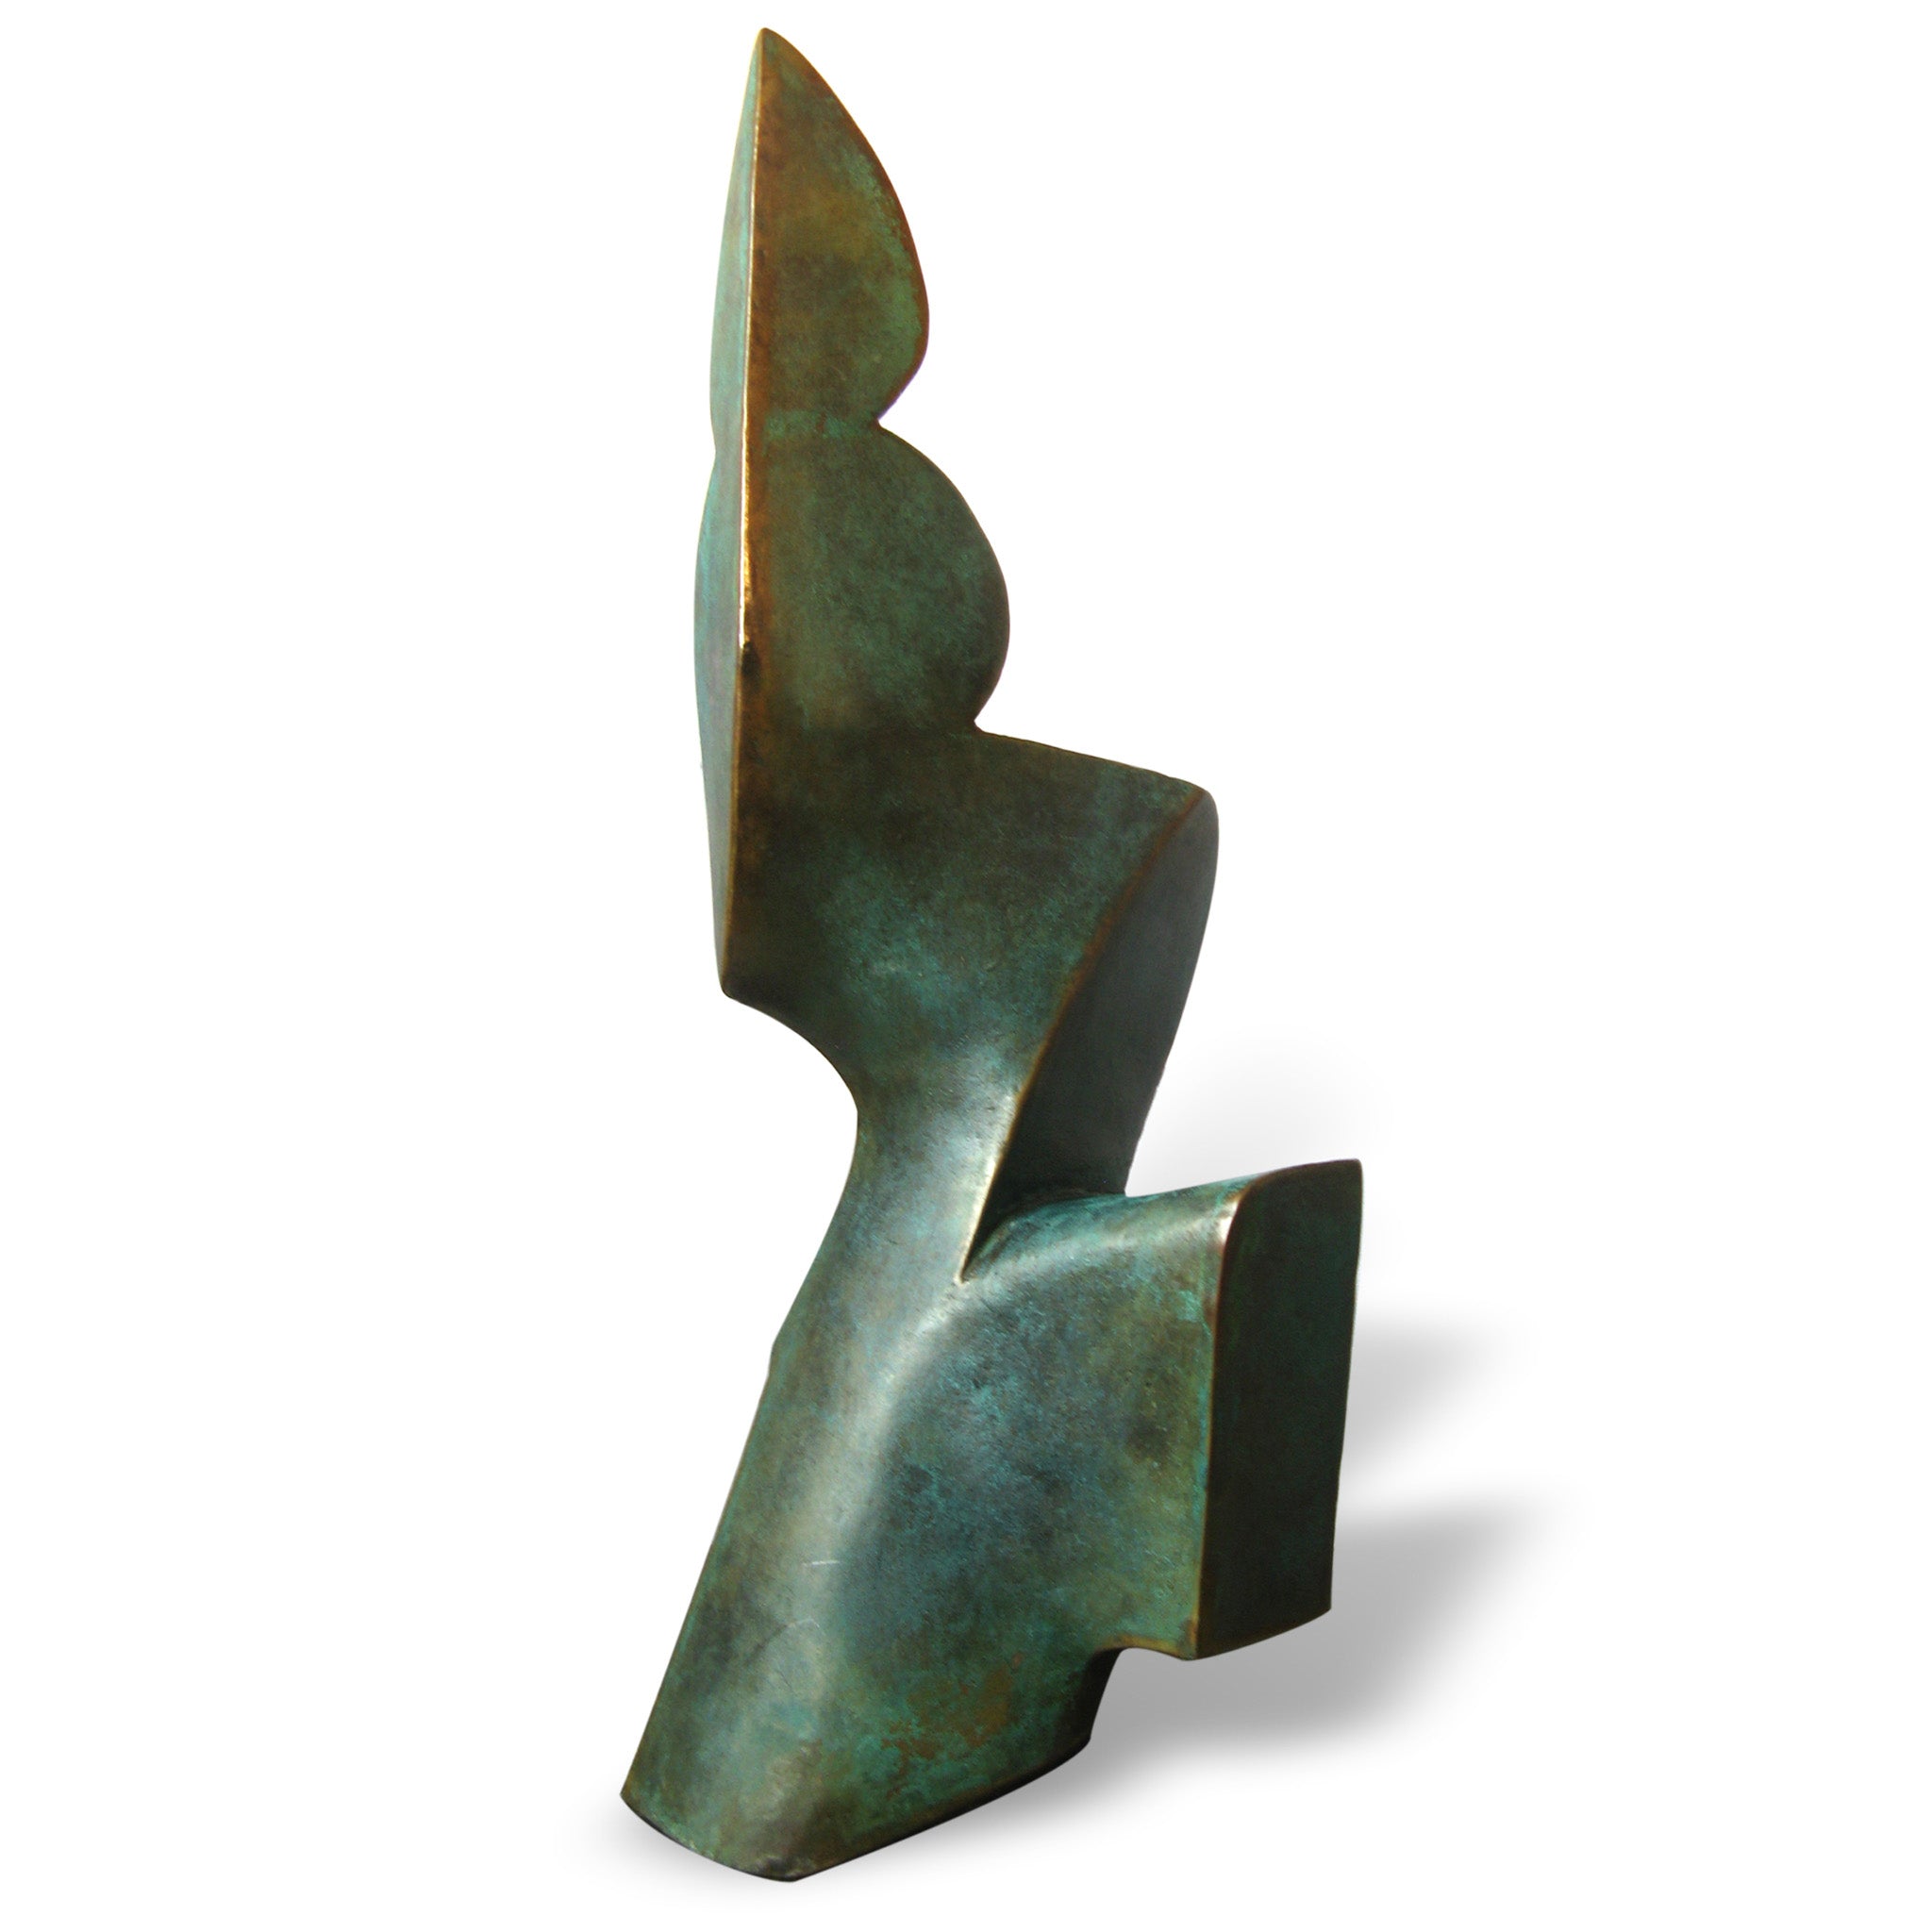 Abstract geometric bronze sculpture by Stephen Williams | New Zealand.